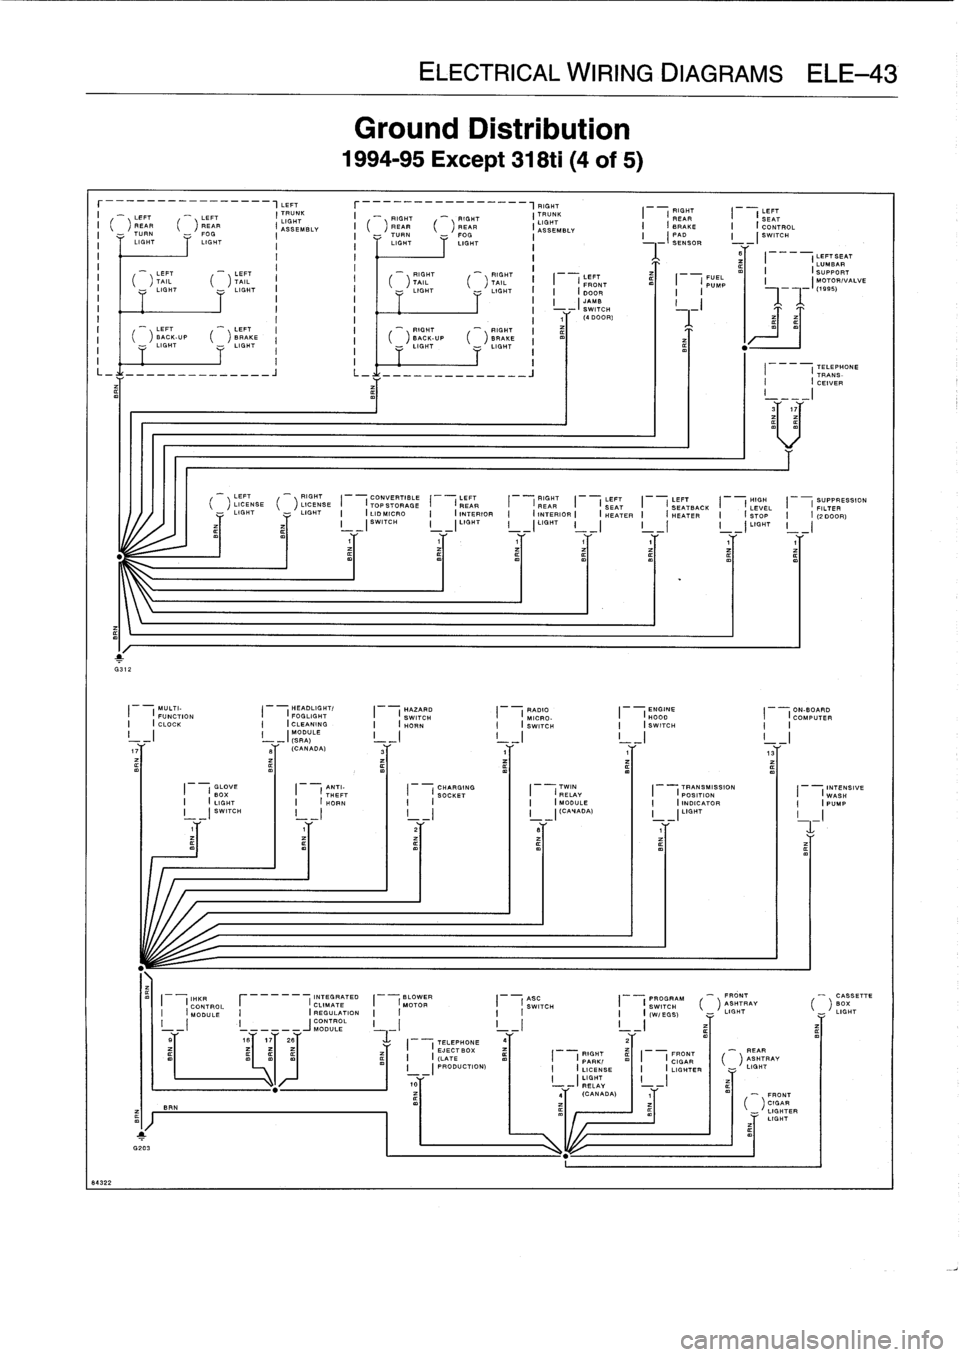 BMW M3 1994 E36 Owners Guide 
ELECTRICAL
WIRING
DIAGRAMSELE-43

r----------_-__--,LEFT

	

r---__-------~_--,FIGHT
I

	

-

	

RIGHT

	

LIT
LEFT

	

"-

	

LEFT

	

I
IGHT
K

	

I

	

_

	

RIGHT

	



	

RIGHT

	

I
TRUNK
SEM